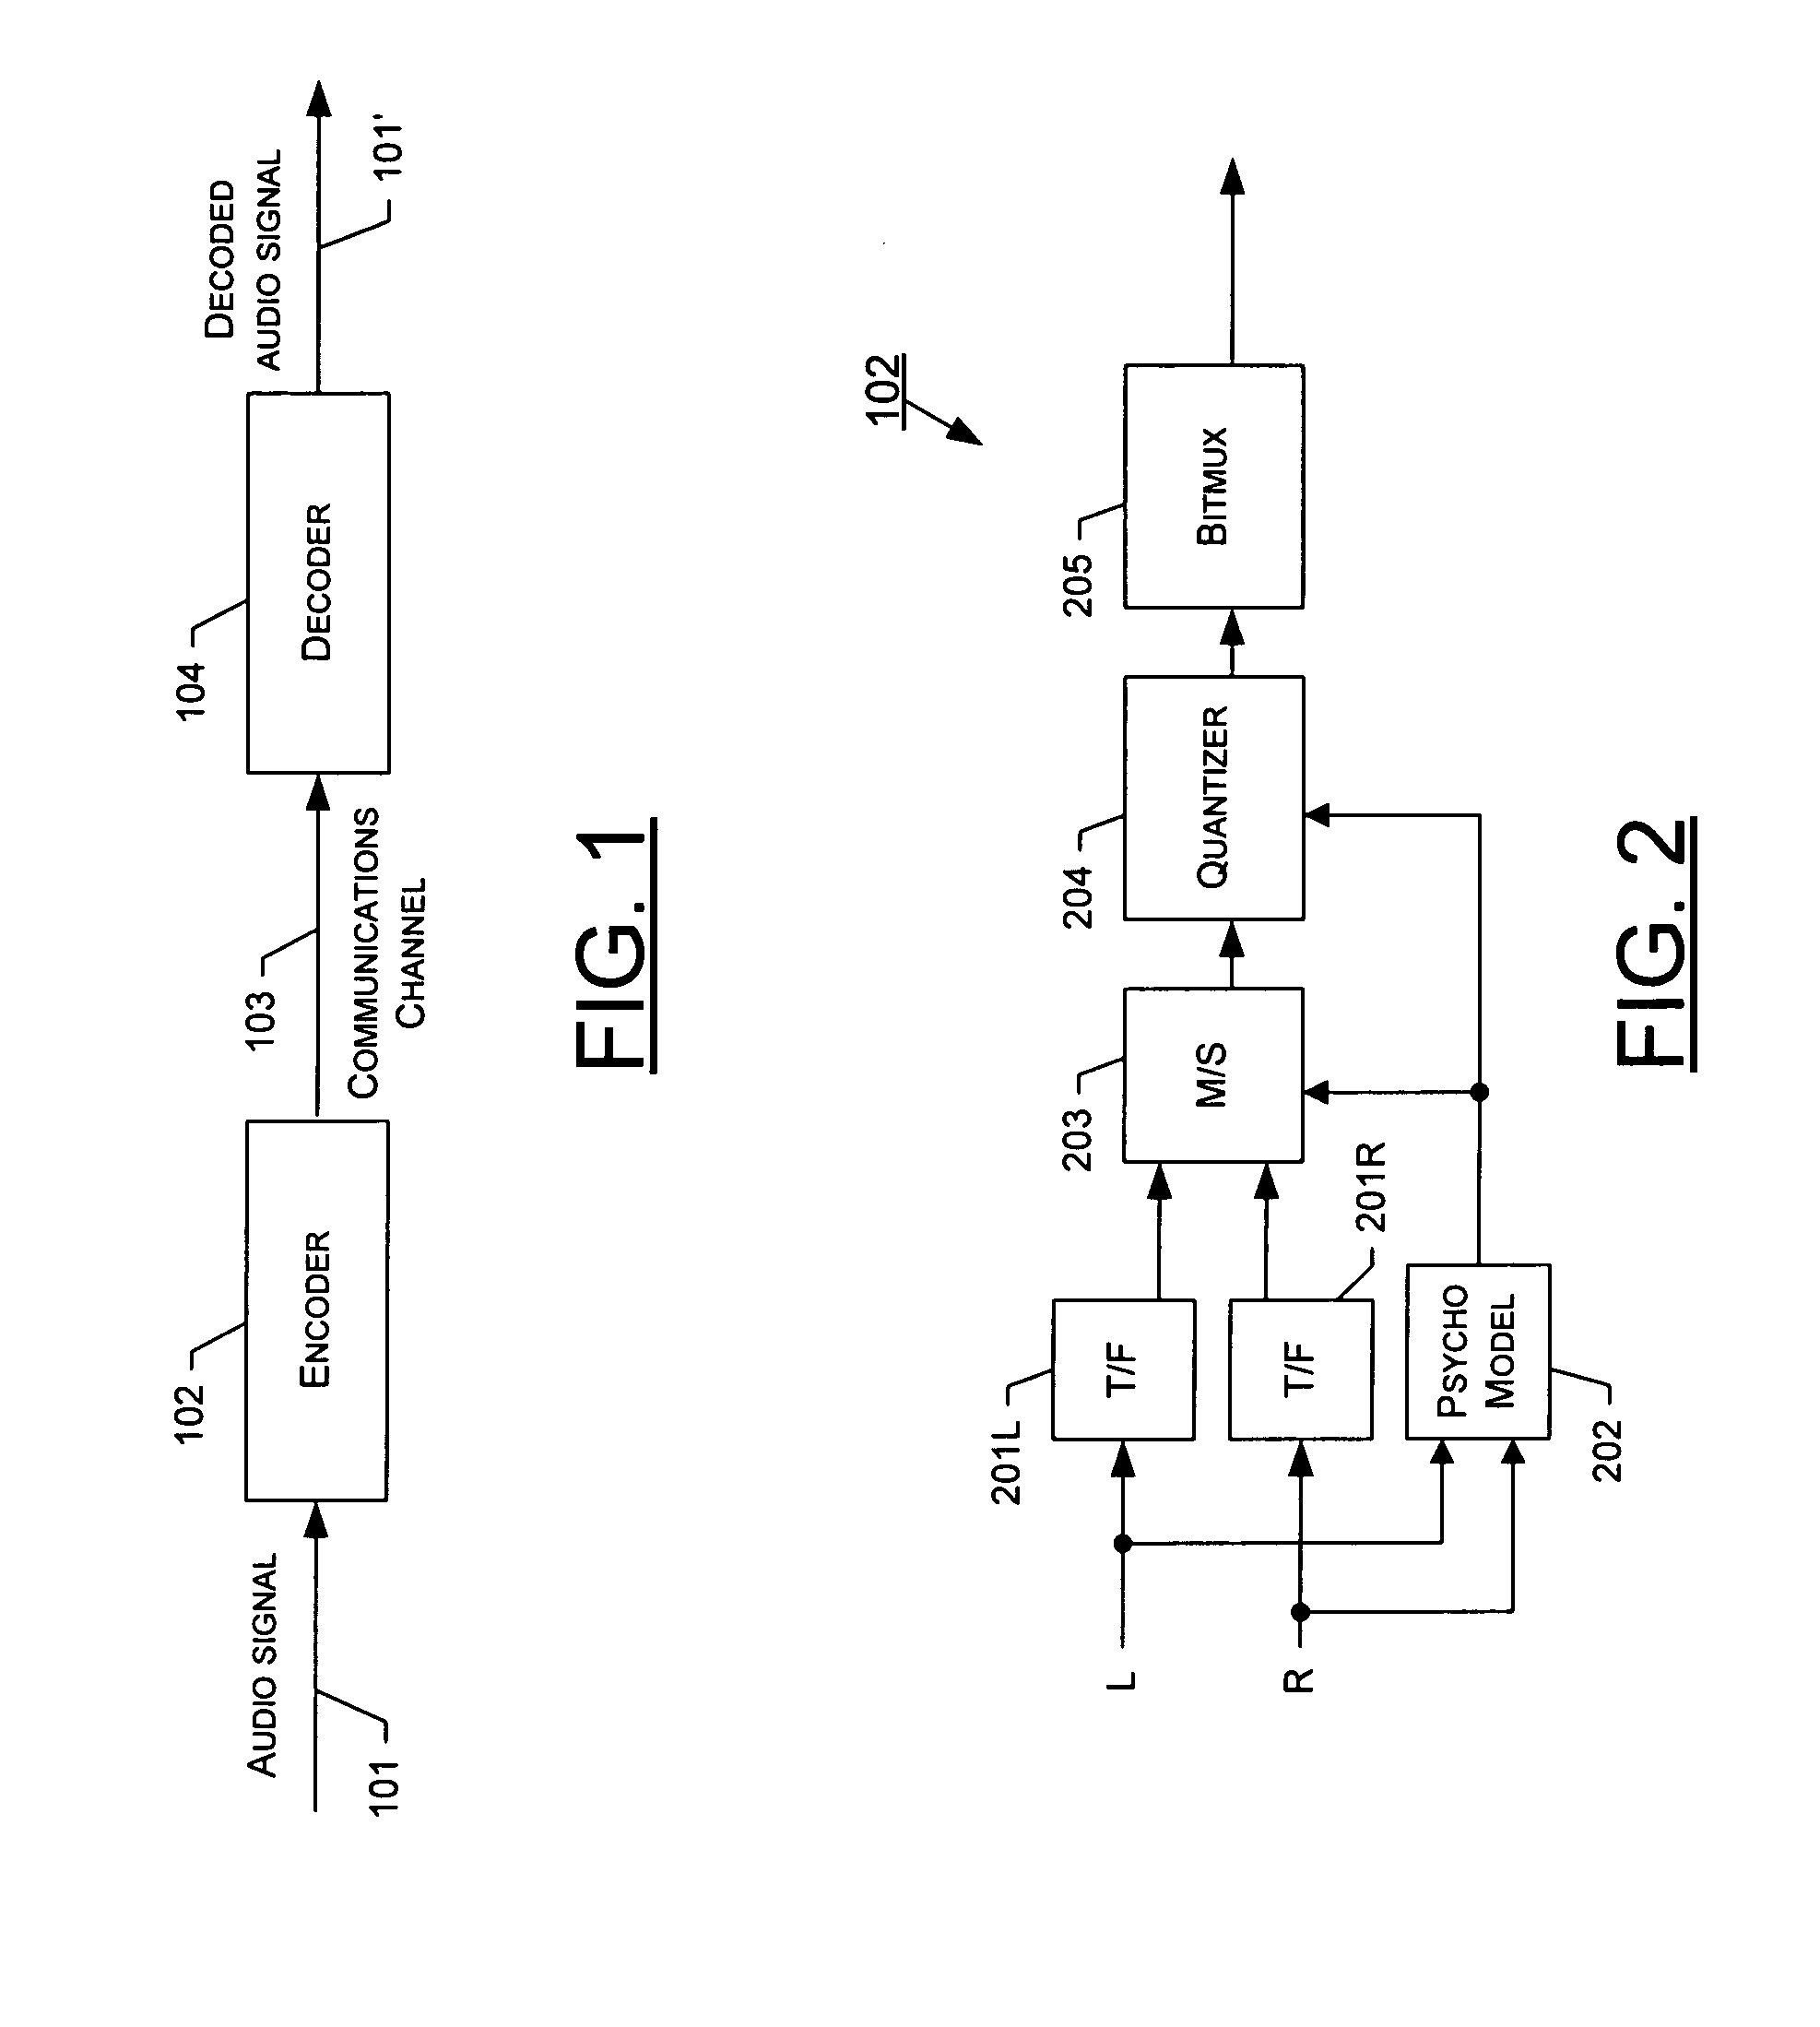 Method, system, apparatus and computer program product for stereo coding